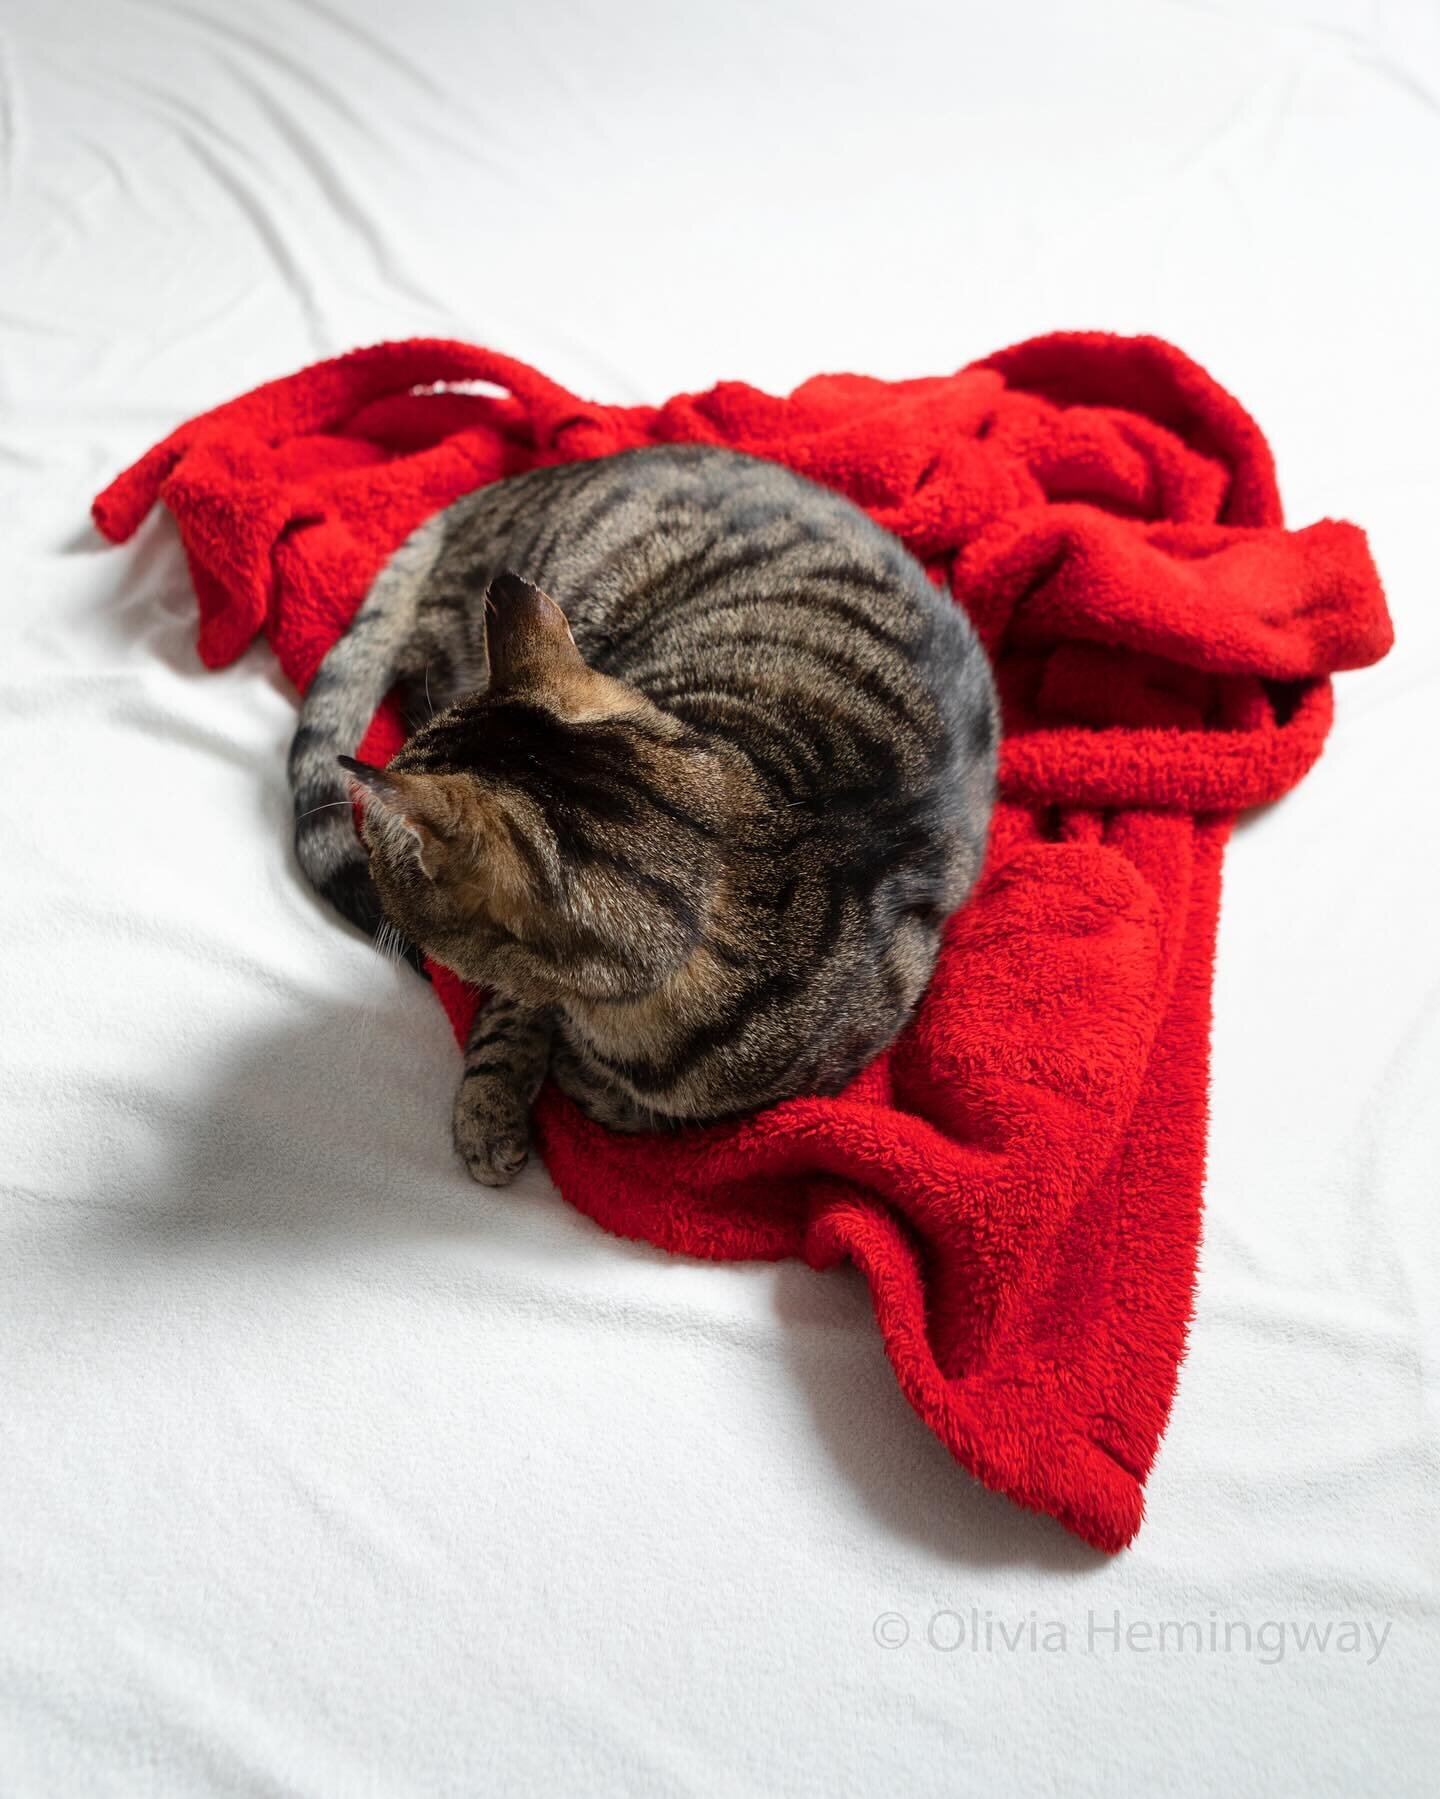 When your cat gets cosy on a vaguely heart shaped red gown and it seems like a moment to capture. Happy to say this image is now available to license through @millennium_images ❤️
Happy Valentine&rsquo;s Day whoever you spend it with 😻

#millennium_